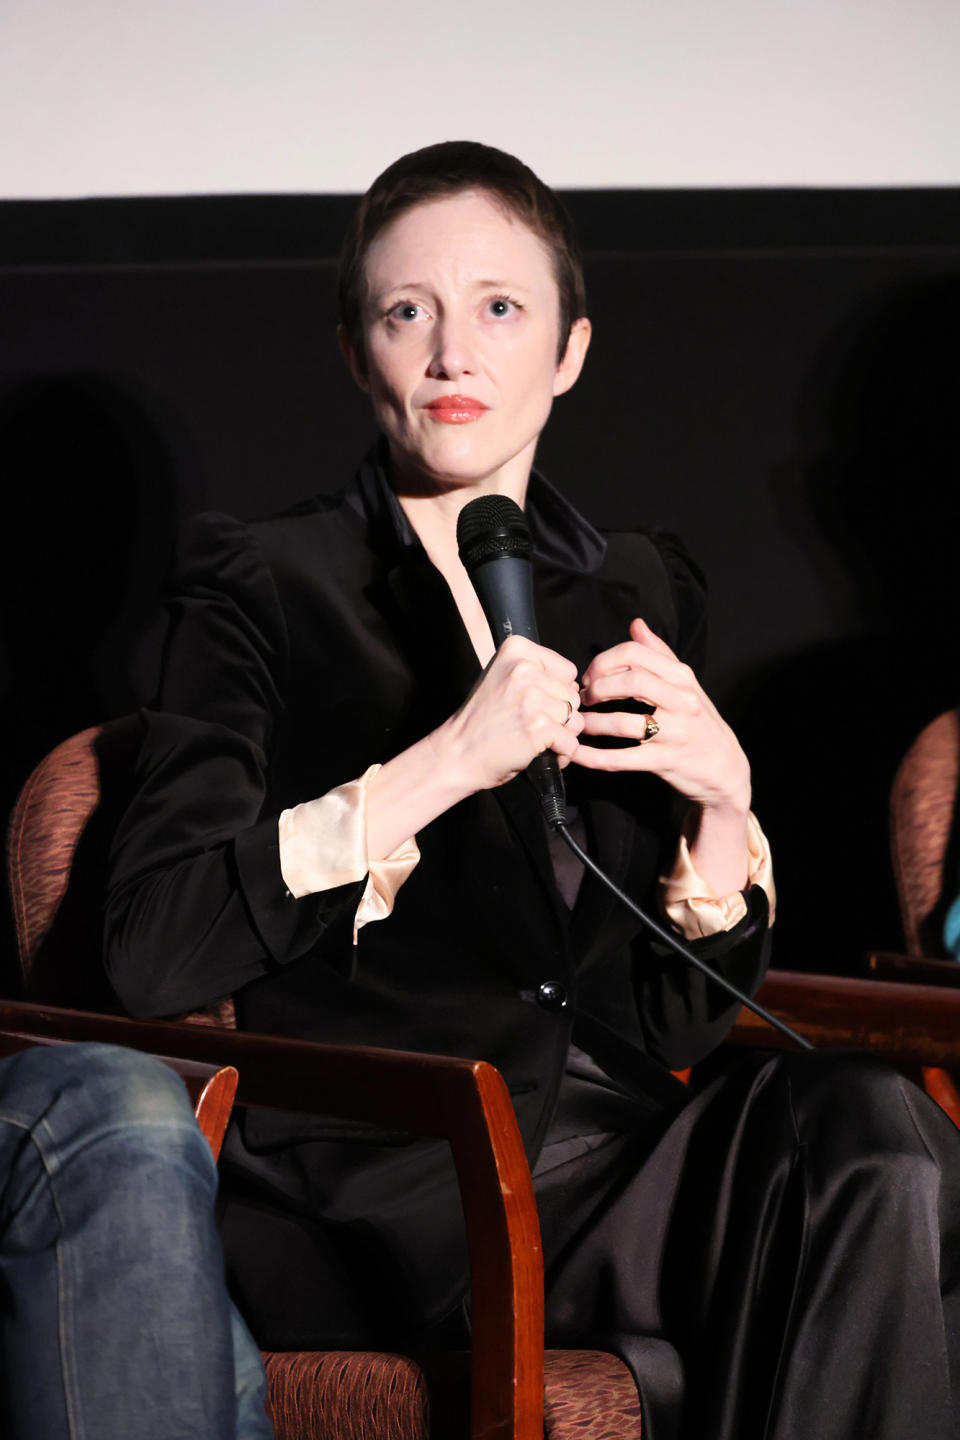 How Did Andrea Riseborough React to Her Oscar Nomination?